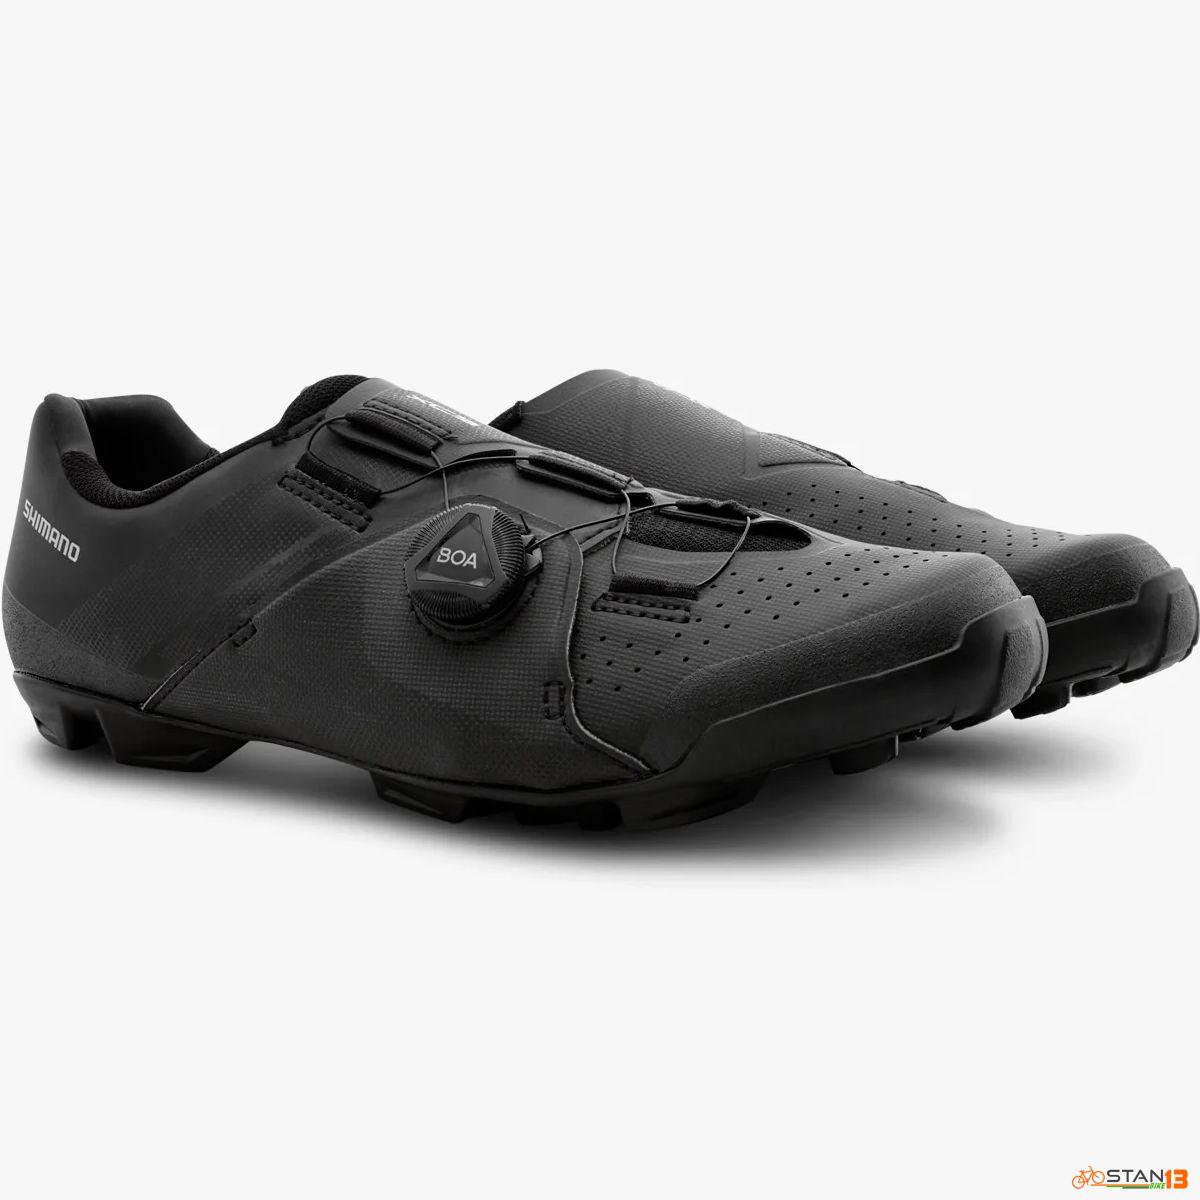 Shoes Shimano XC300 MTB Shoes with BOA Adjuster Size 44 or 10 US Size